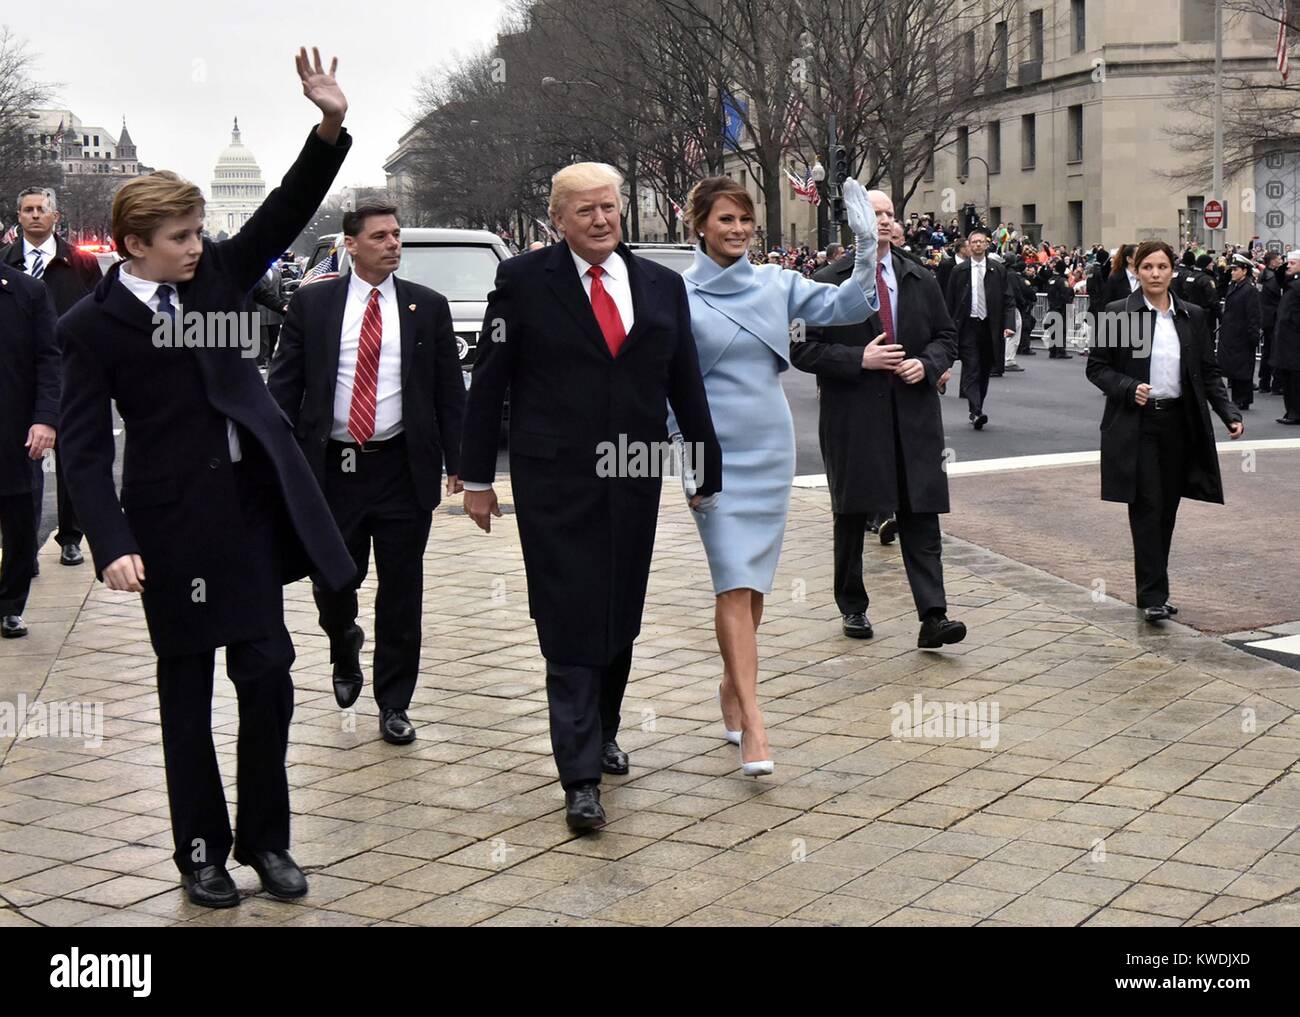 President Donald Trumps Inaugural Parade with the new First Lady, Melania Trump, and Barron Trump. Earlier he was sworn in as the 45th President of the United States, Jan. 20, 2017, in Washington, DC (BSLOC 2017 19 1) Stock Photo